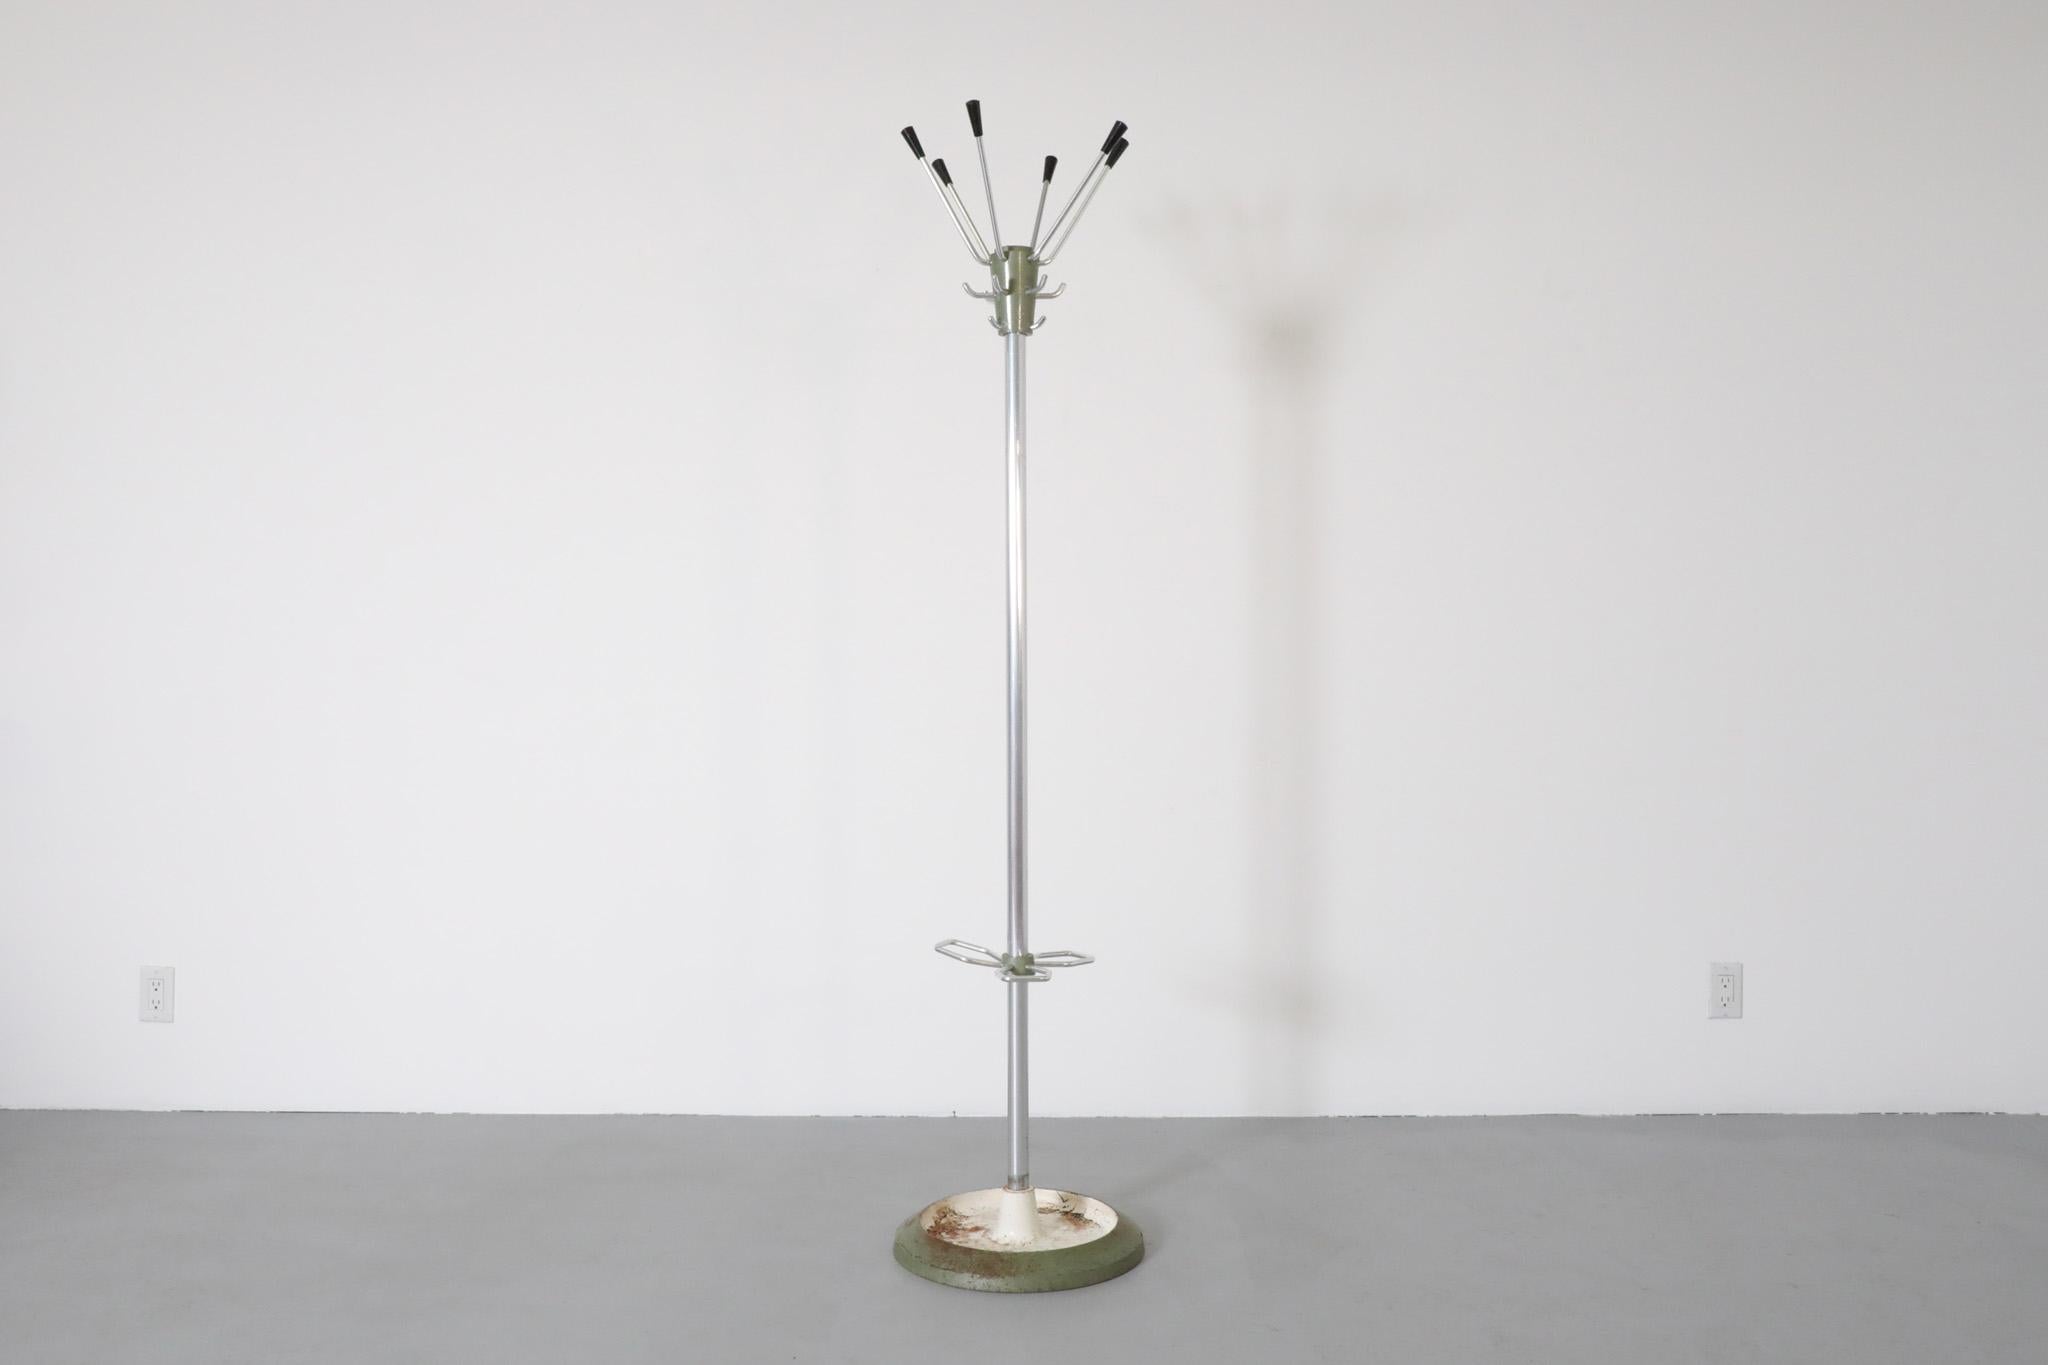 Mid-Century, Jacques Adnet inspired five-armed Deco standing coat rack with chrome trunk, green enameled metal accents and curved hook umbrella holders on green and white enameled weighted base . An attractive and functional home accent in original